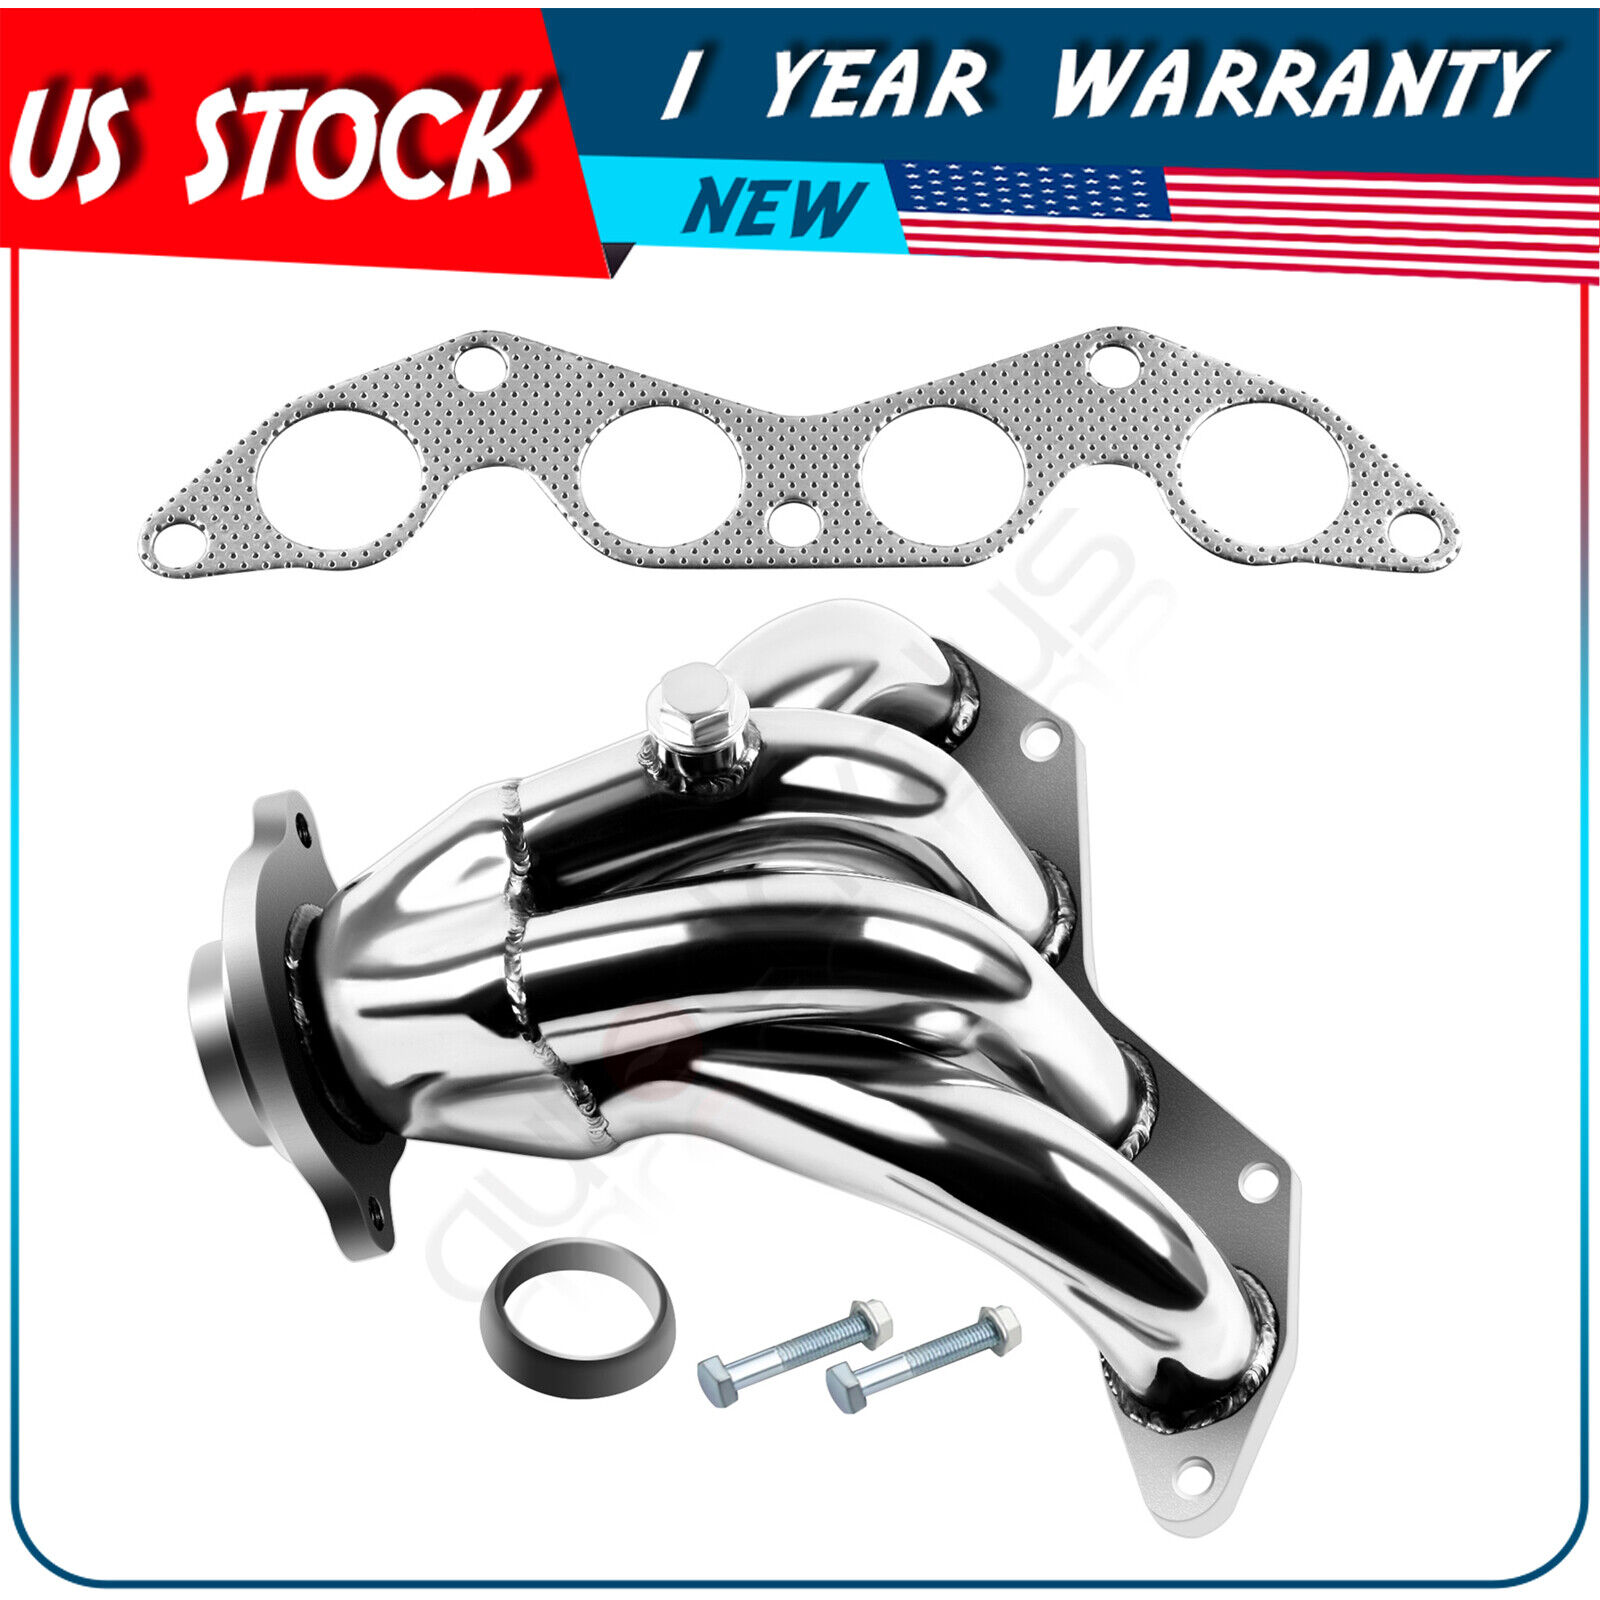 FOR 01-05 HONDA CIVIC EX D17A2 1.7L STAINLESS MANIFOLD EXHAUST HEADER+GASKET